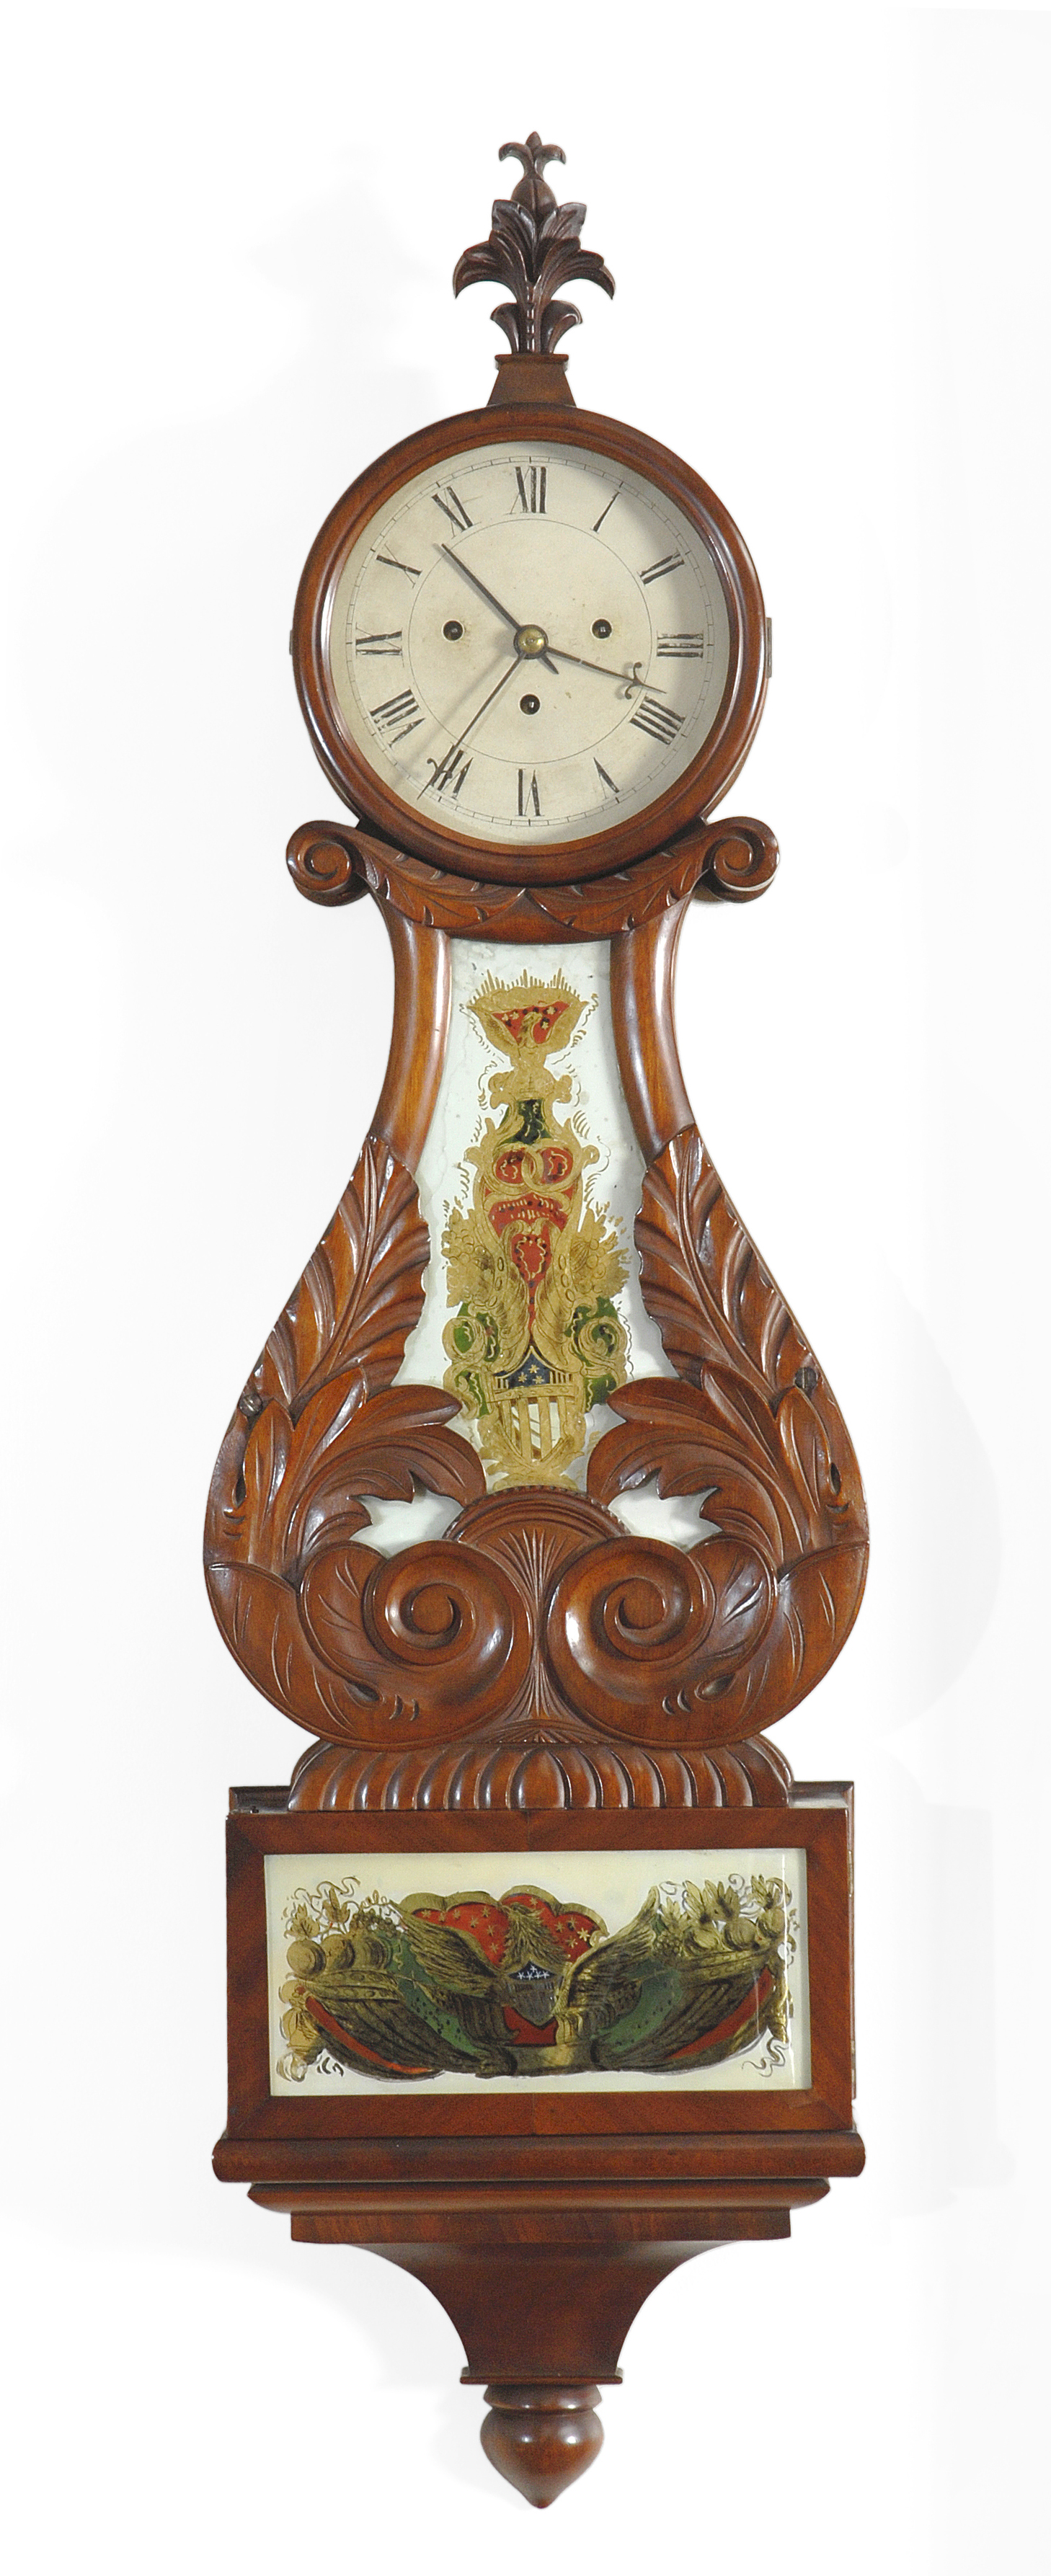 A rare Classical box-lyre banjo clock with alarm, attributed to Abiel Chandler of Concord New Hampshire, circa 1825-1830.